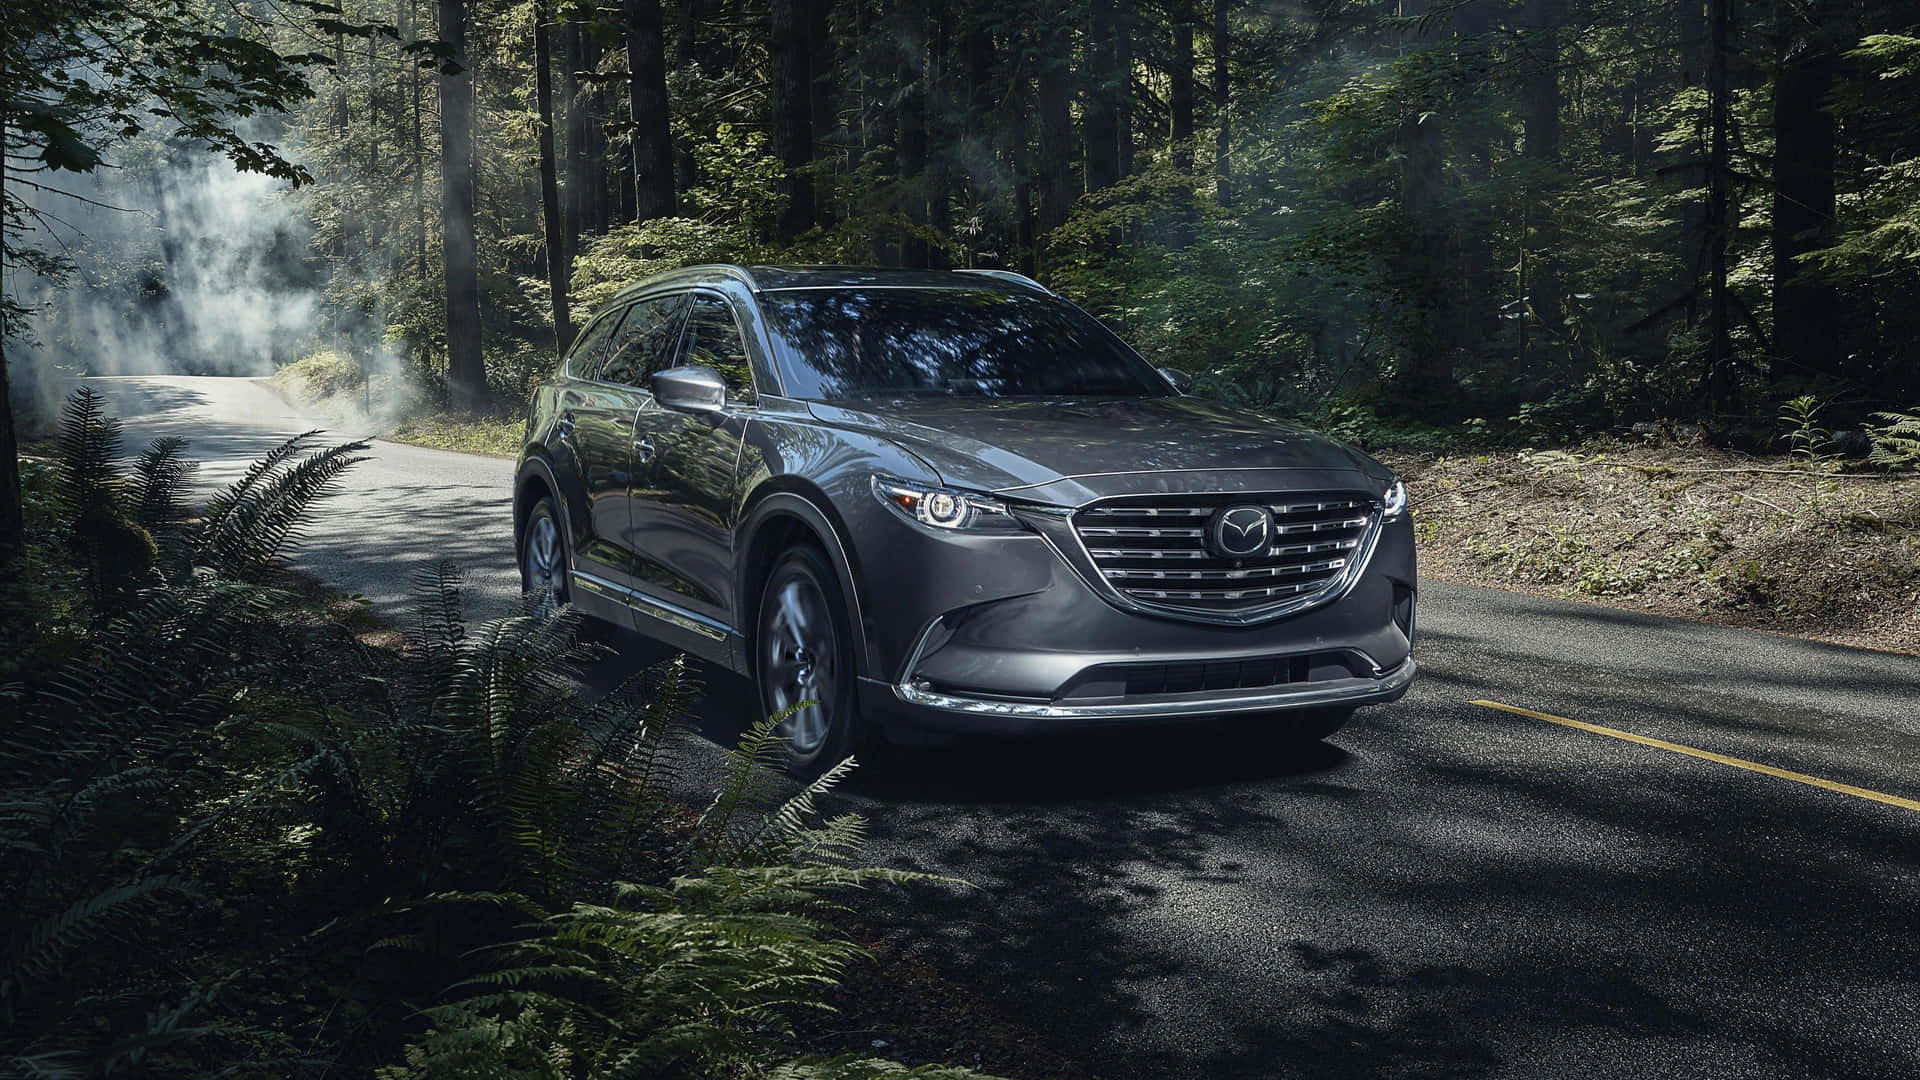 Captivating Mazda CX-9 on the Open Road Wallpaper